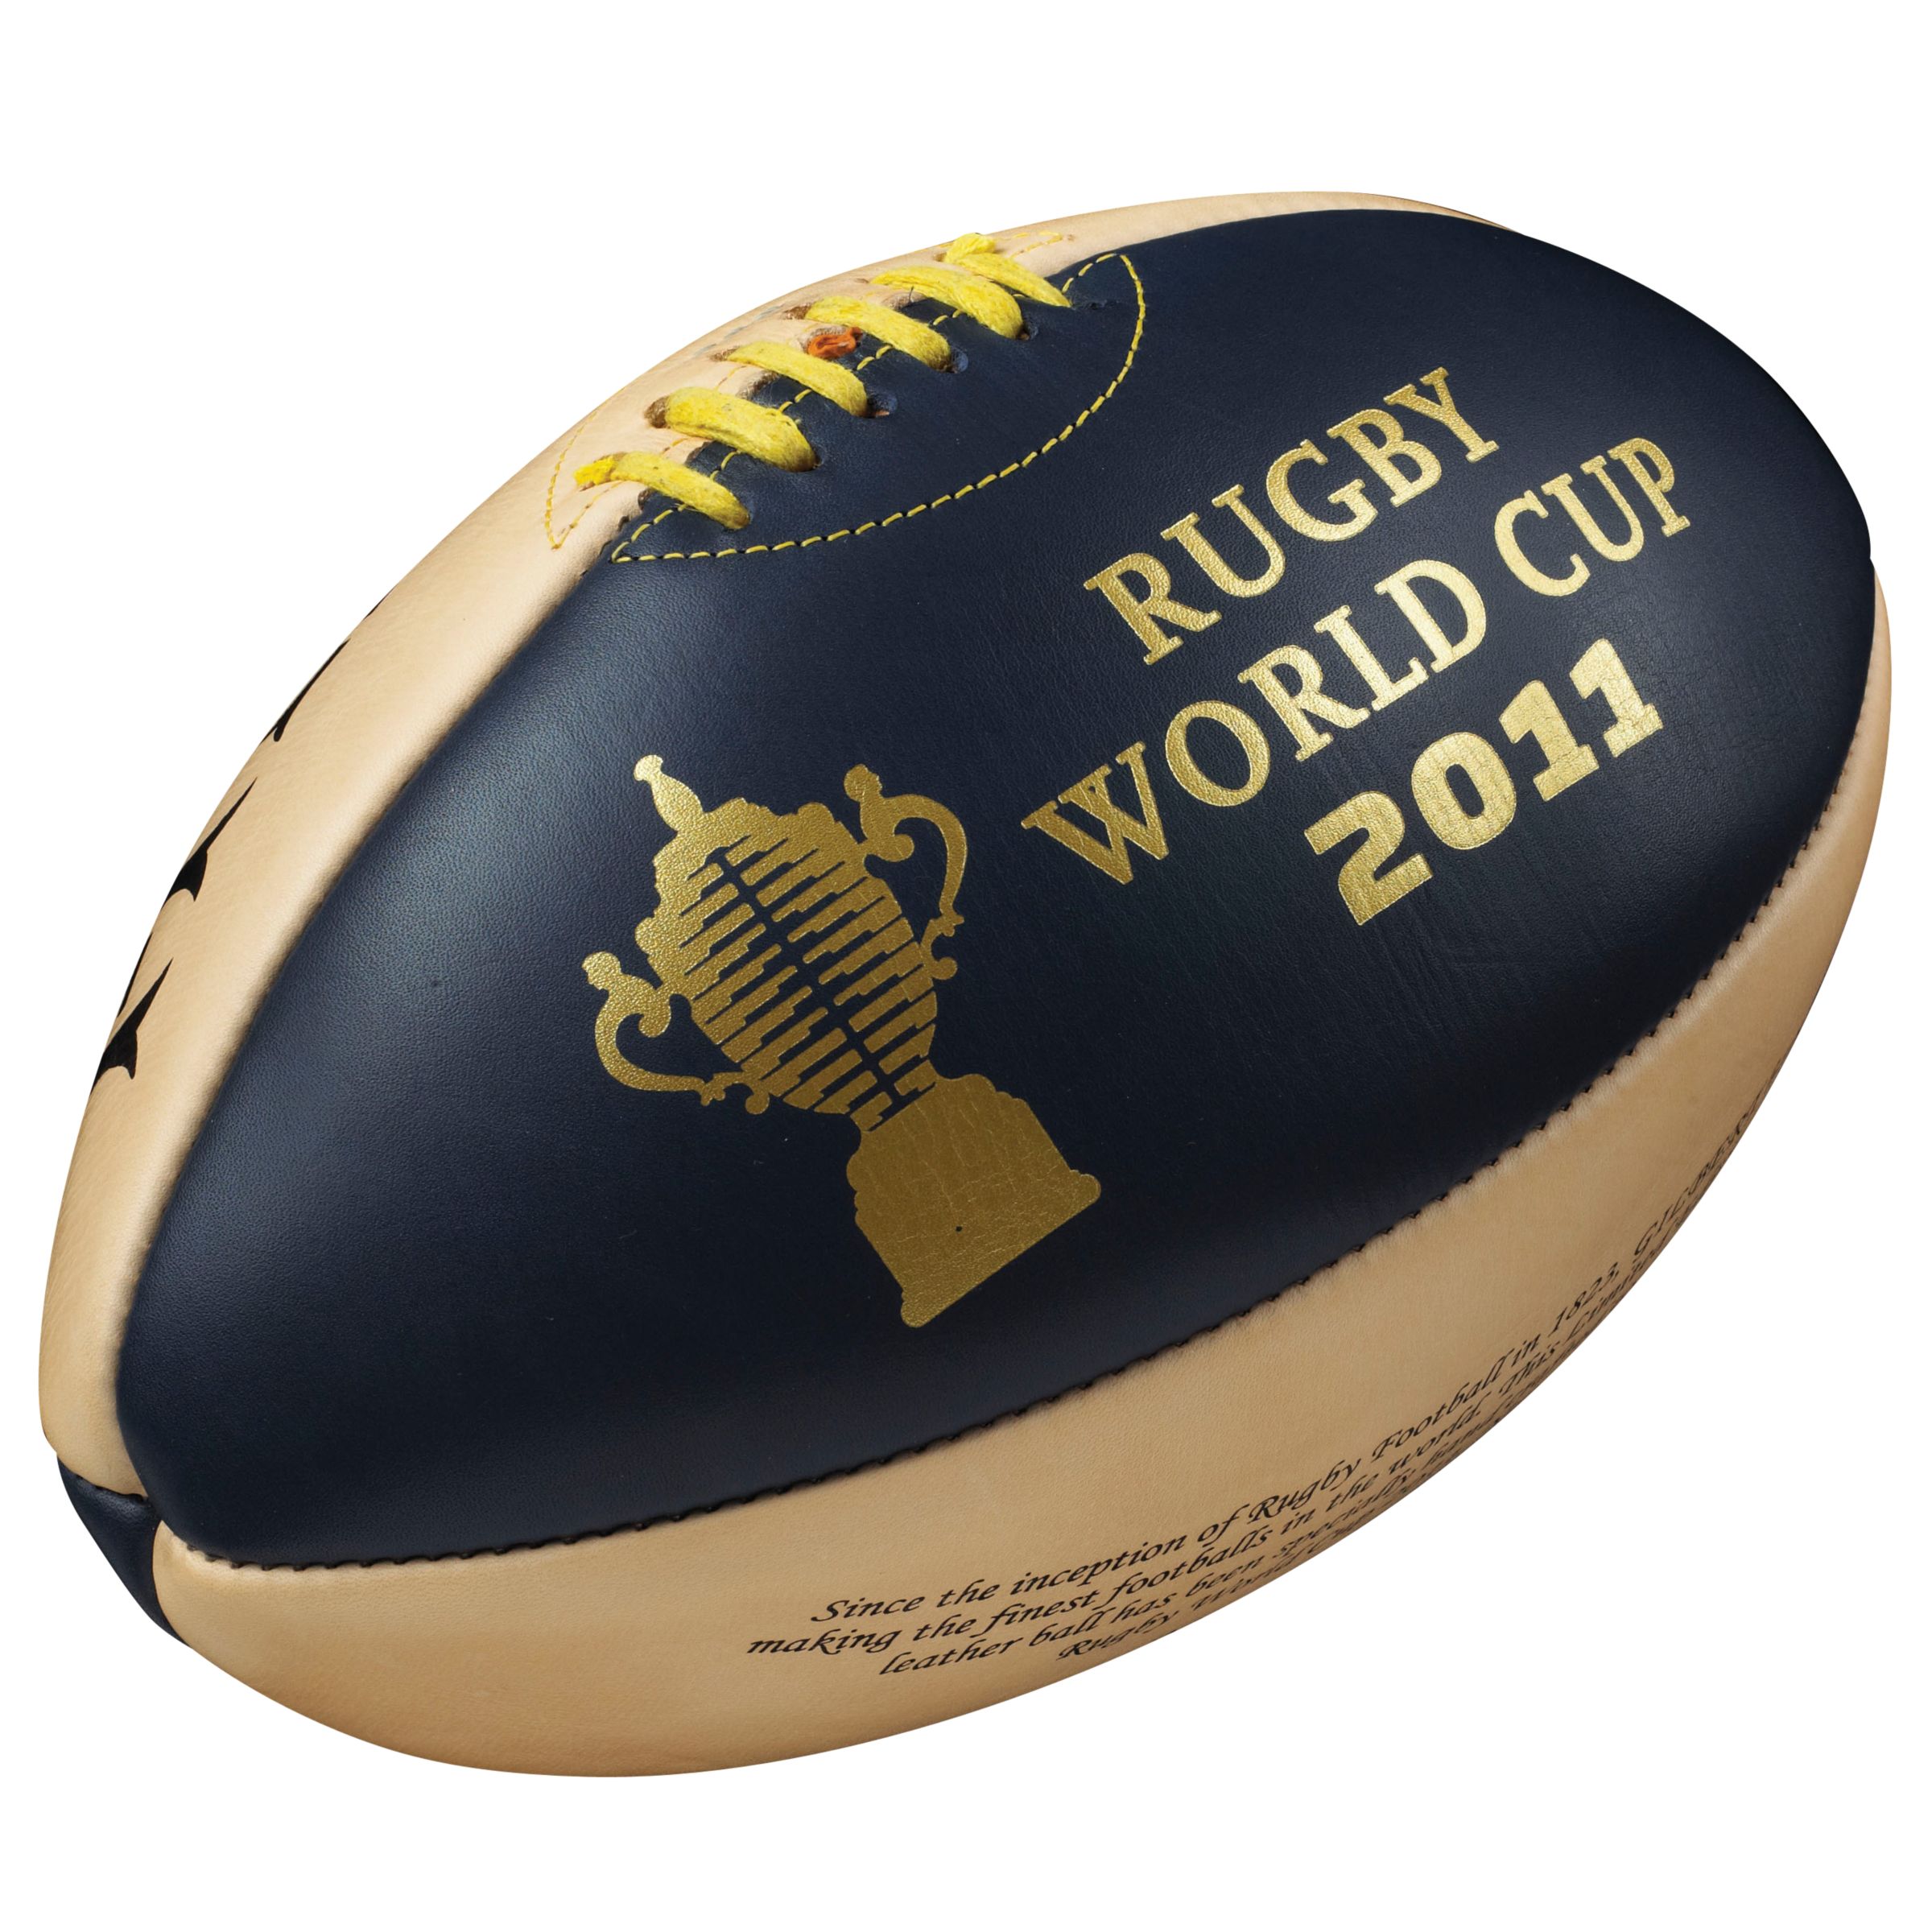 Gilbert Limited Edition Rugby World Cup Chairmans Leather Ball